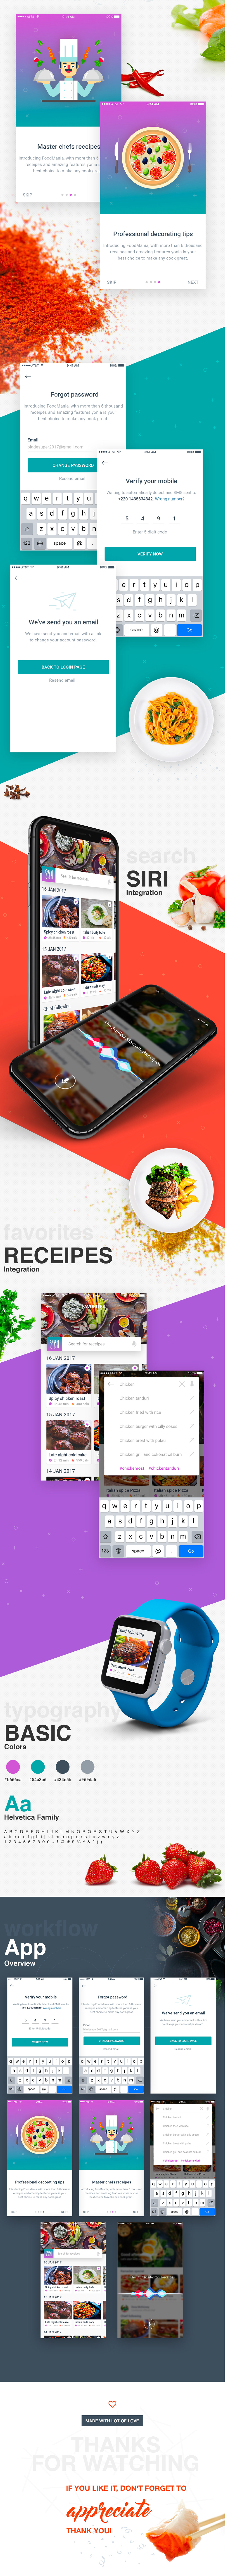 Case Study cooking app information architecture  research UX design